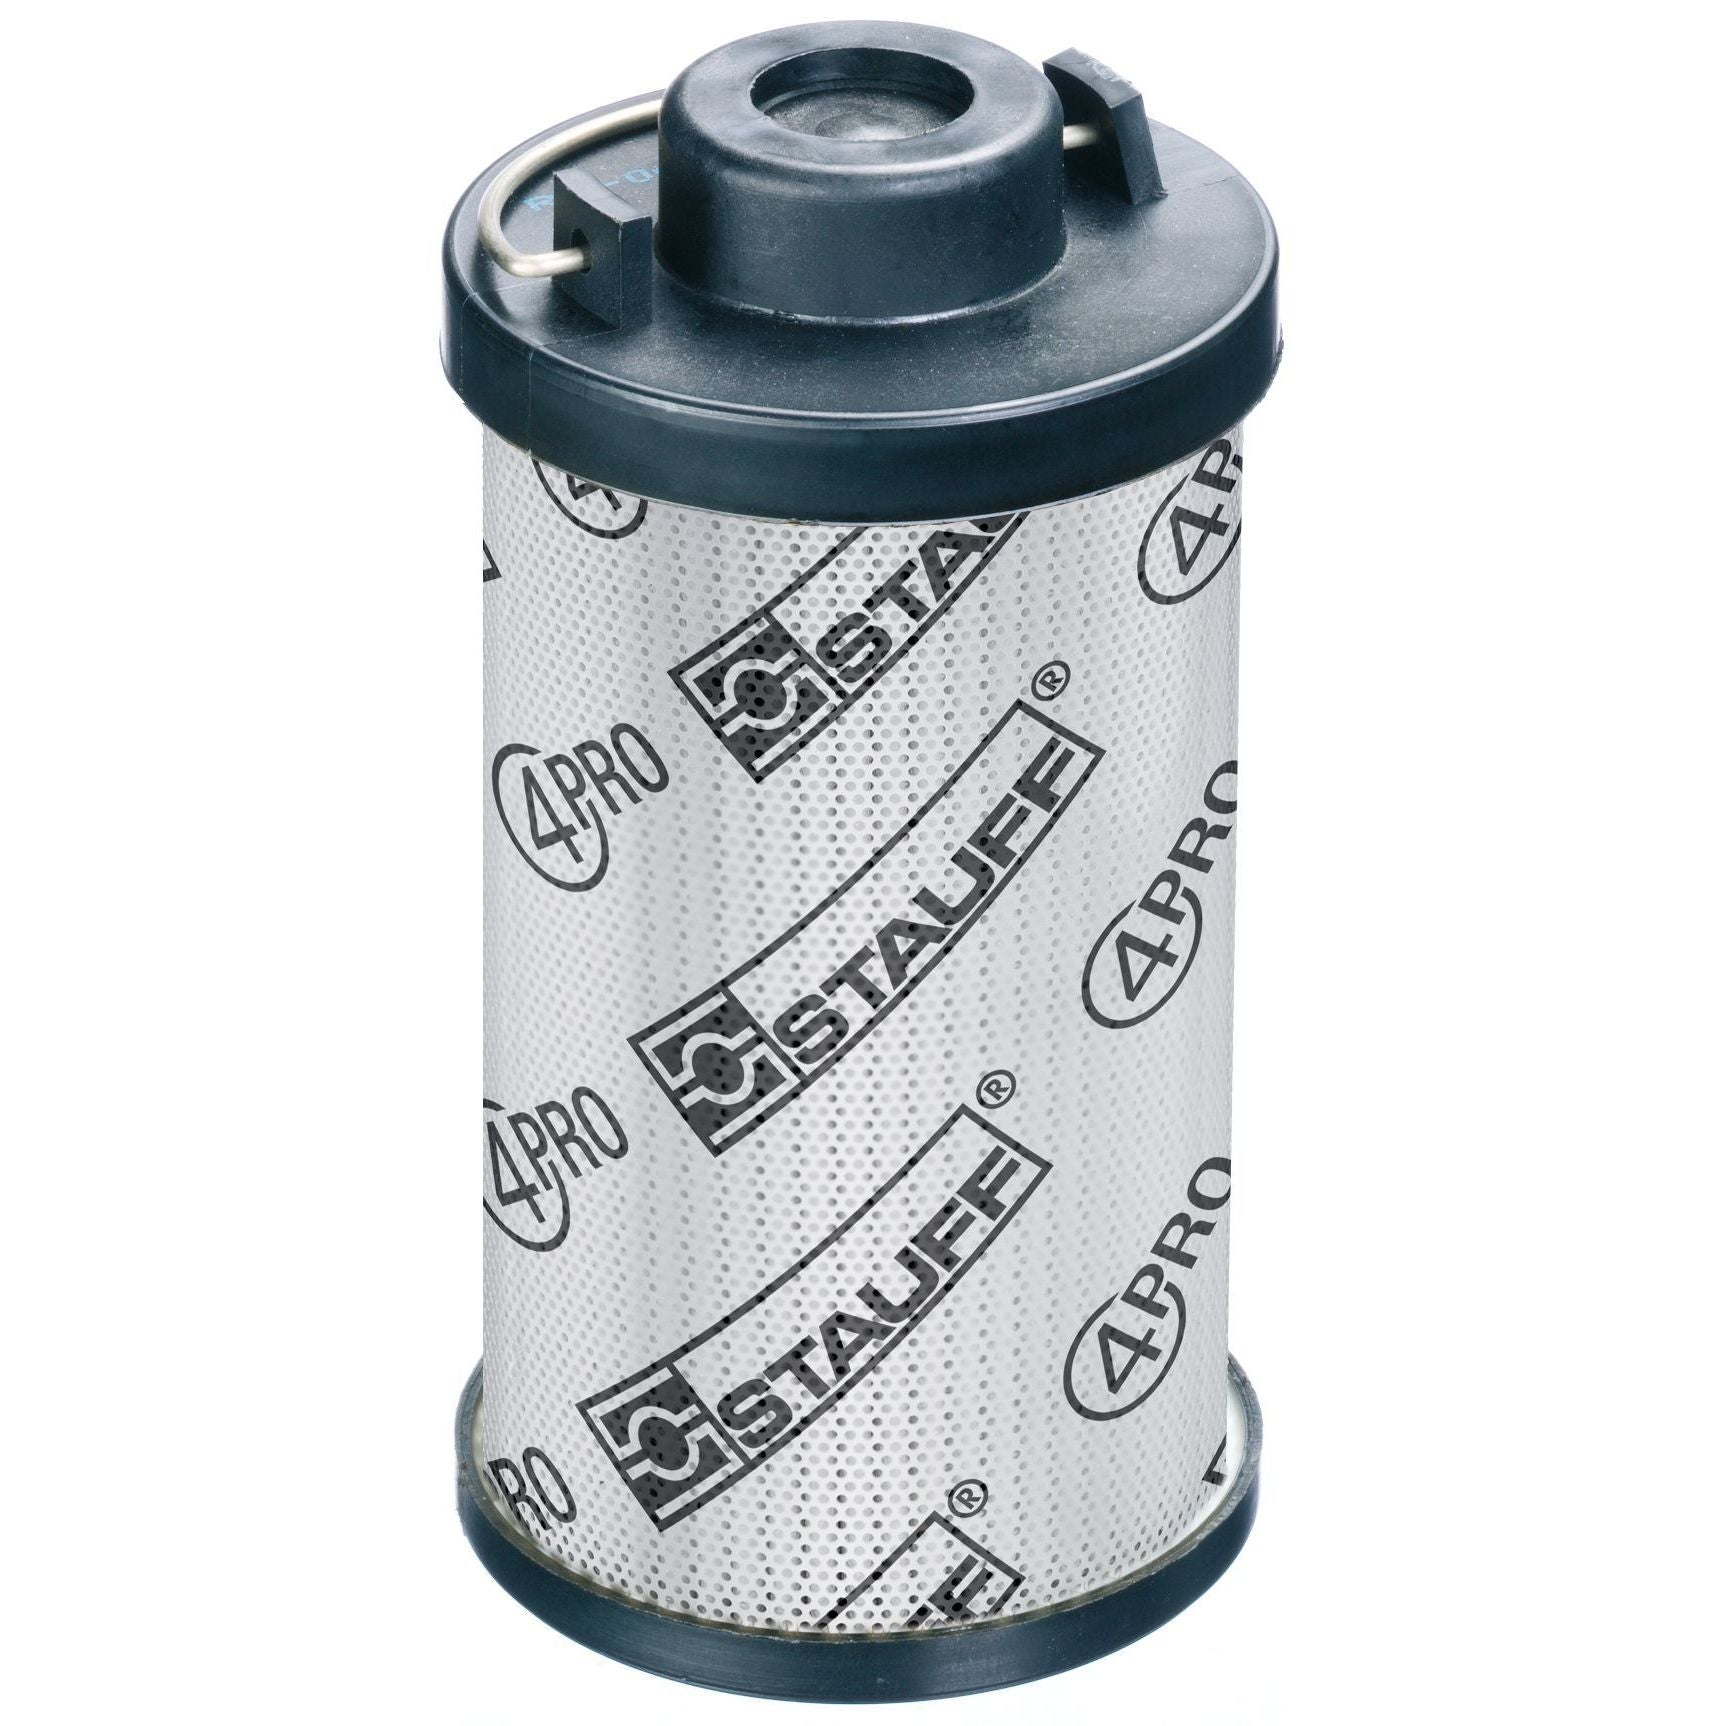 RE-600-G-05-B-B3/4 : Stauff RF-600 Series Filter Element, 5 Micron, Synthetic, 363psi Collapse Differential, Buna